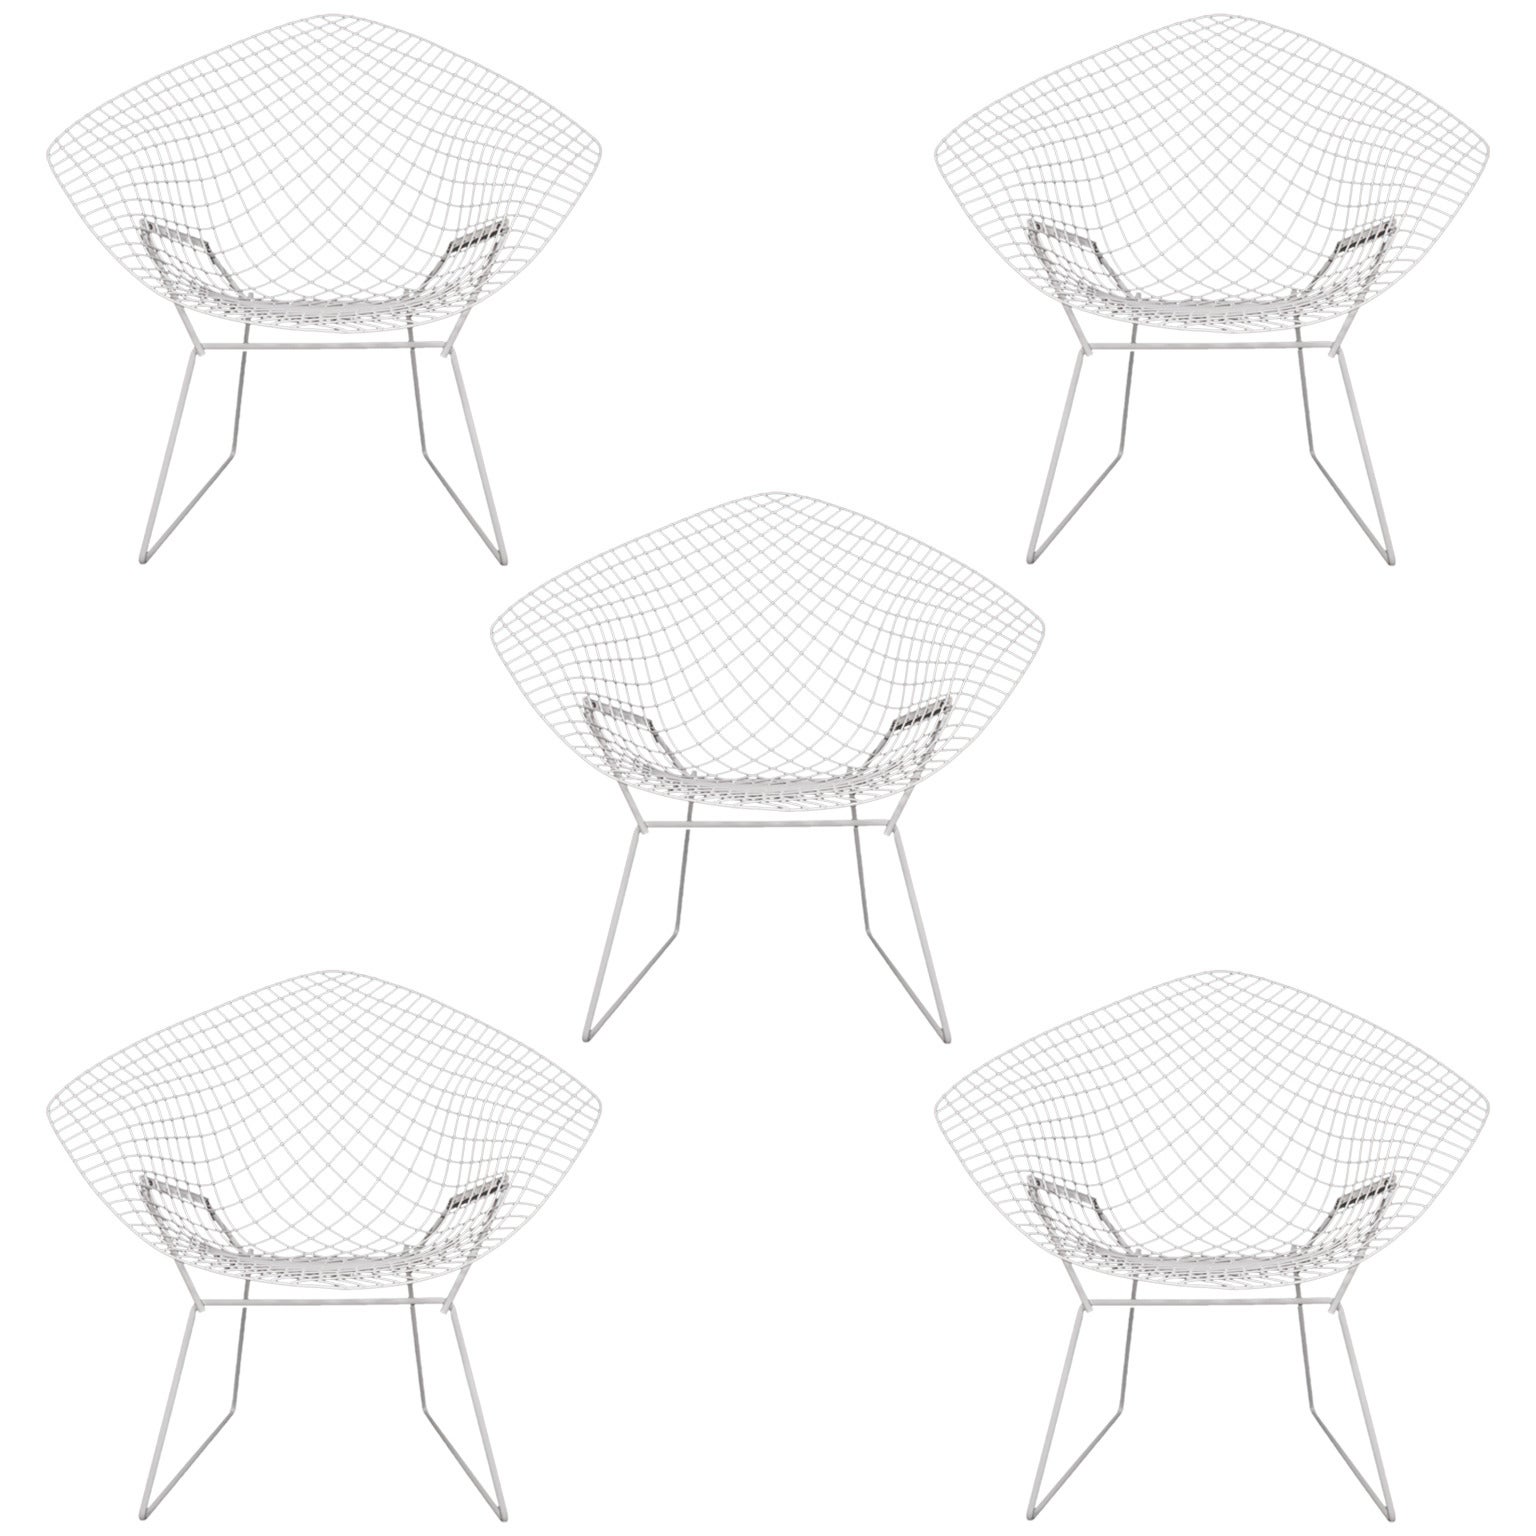 Only Three  Little Diamond Chairs by Harry Bertoia for Knoll